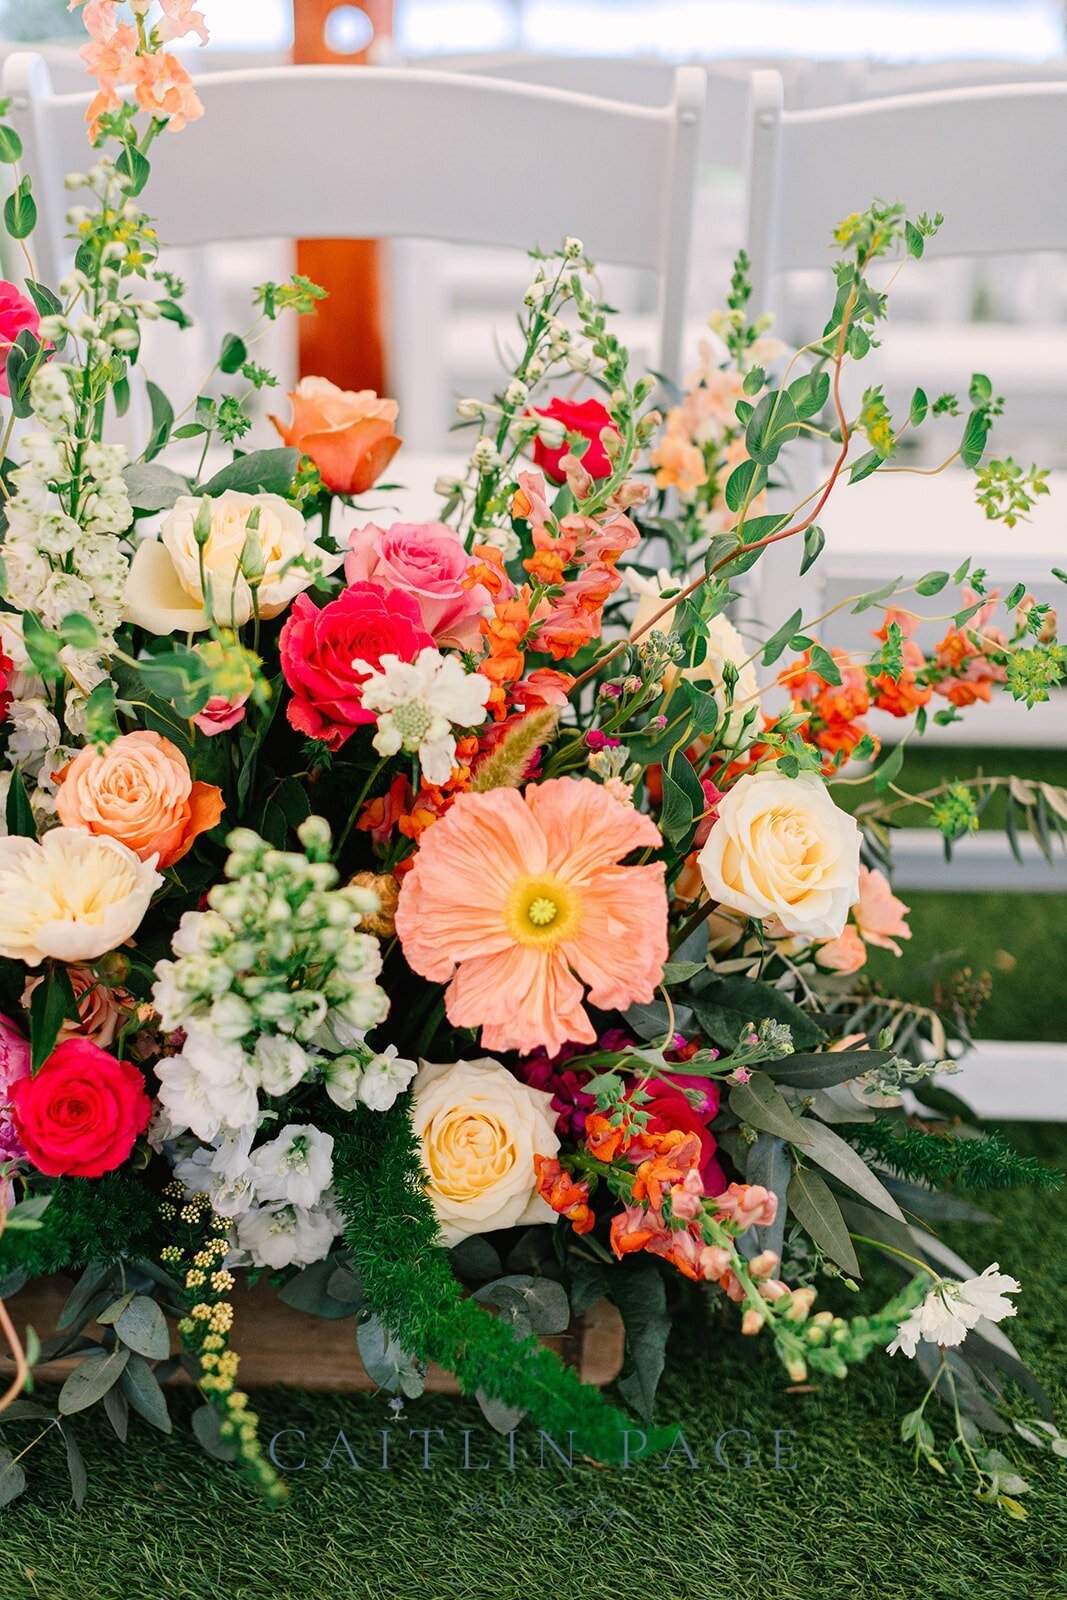 Bright, gorgeous poppies and summertime florals designed at the wedding ceremony entryway